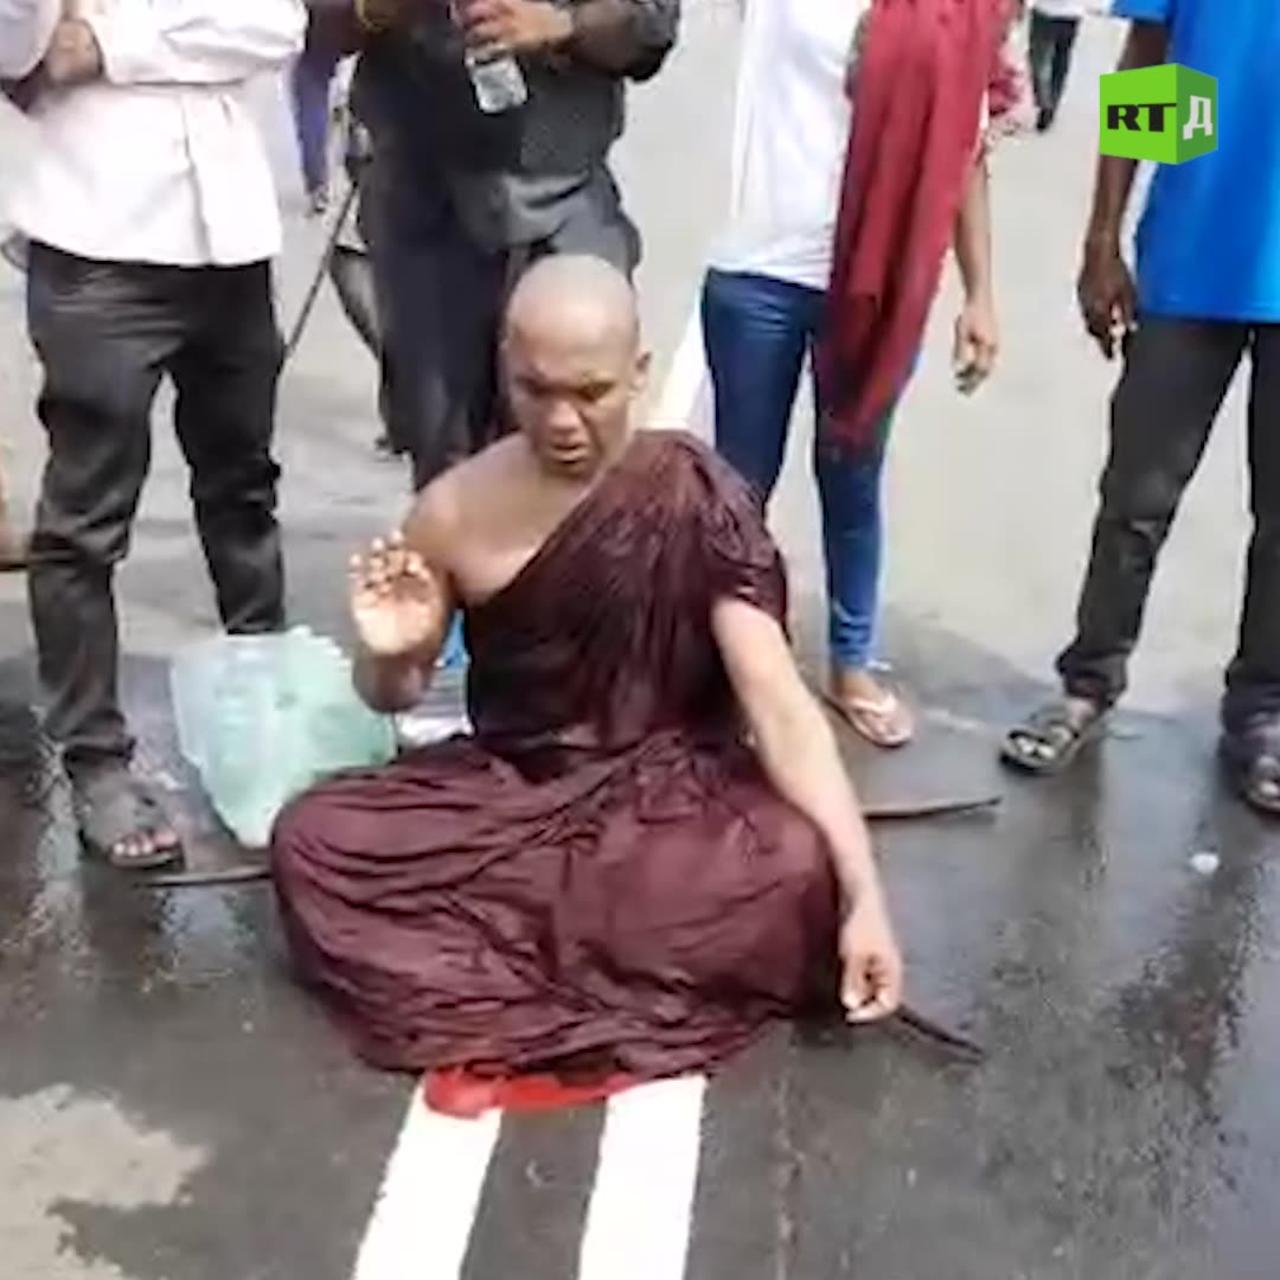 Protests continue in Sri Lanka, despite the imposition of a state of emergency.